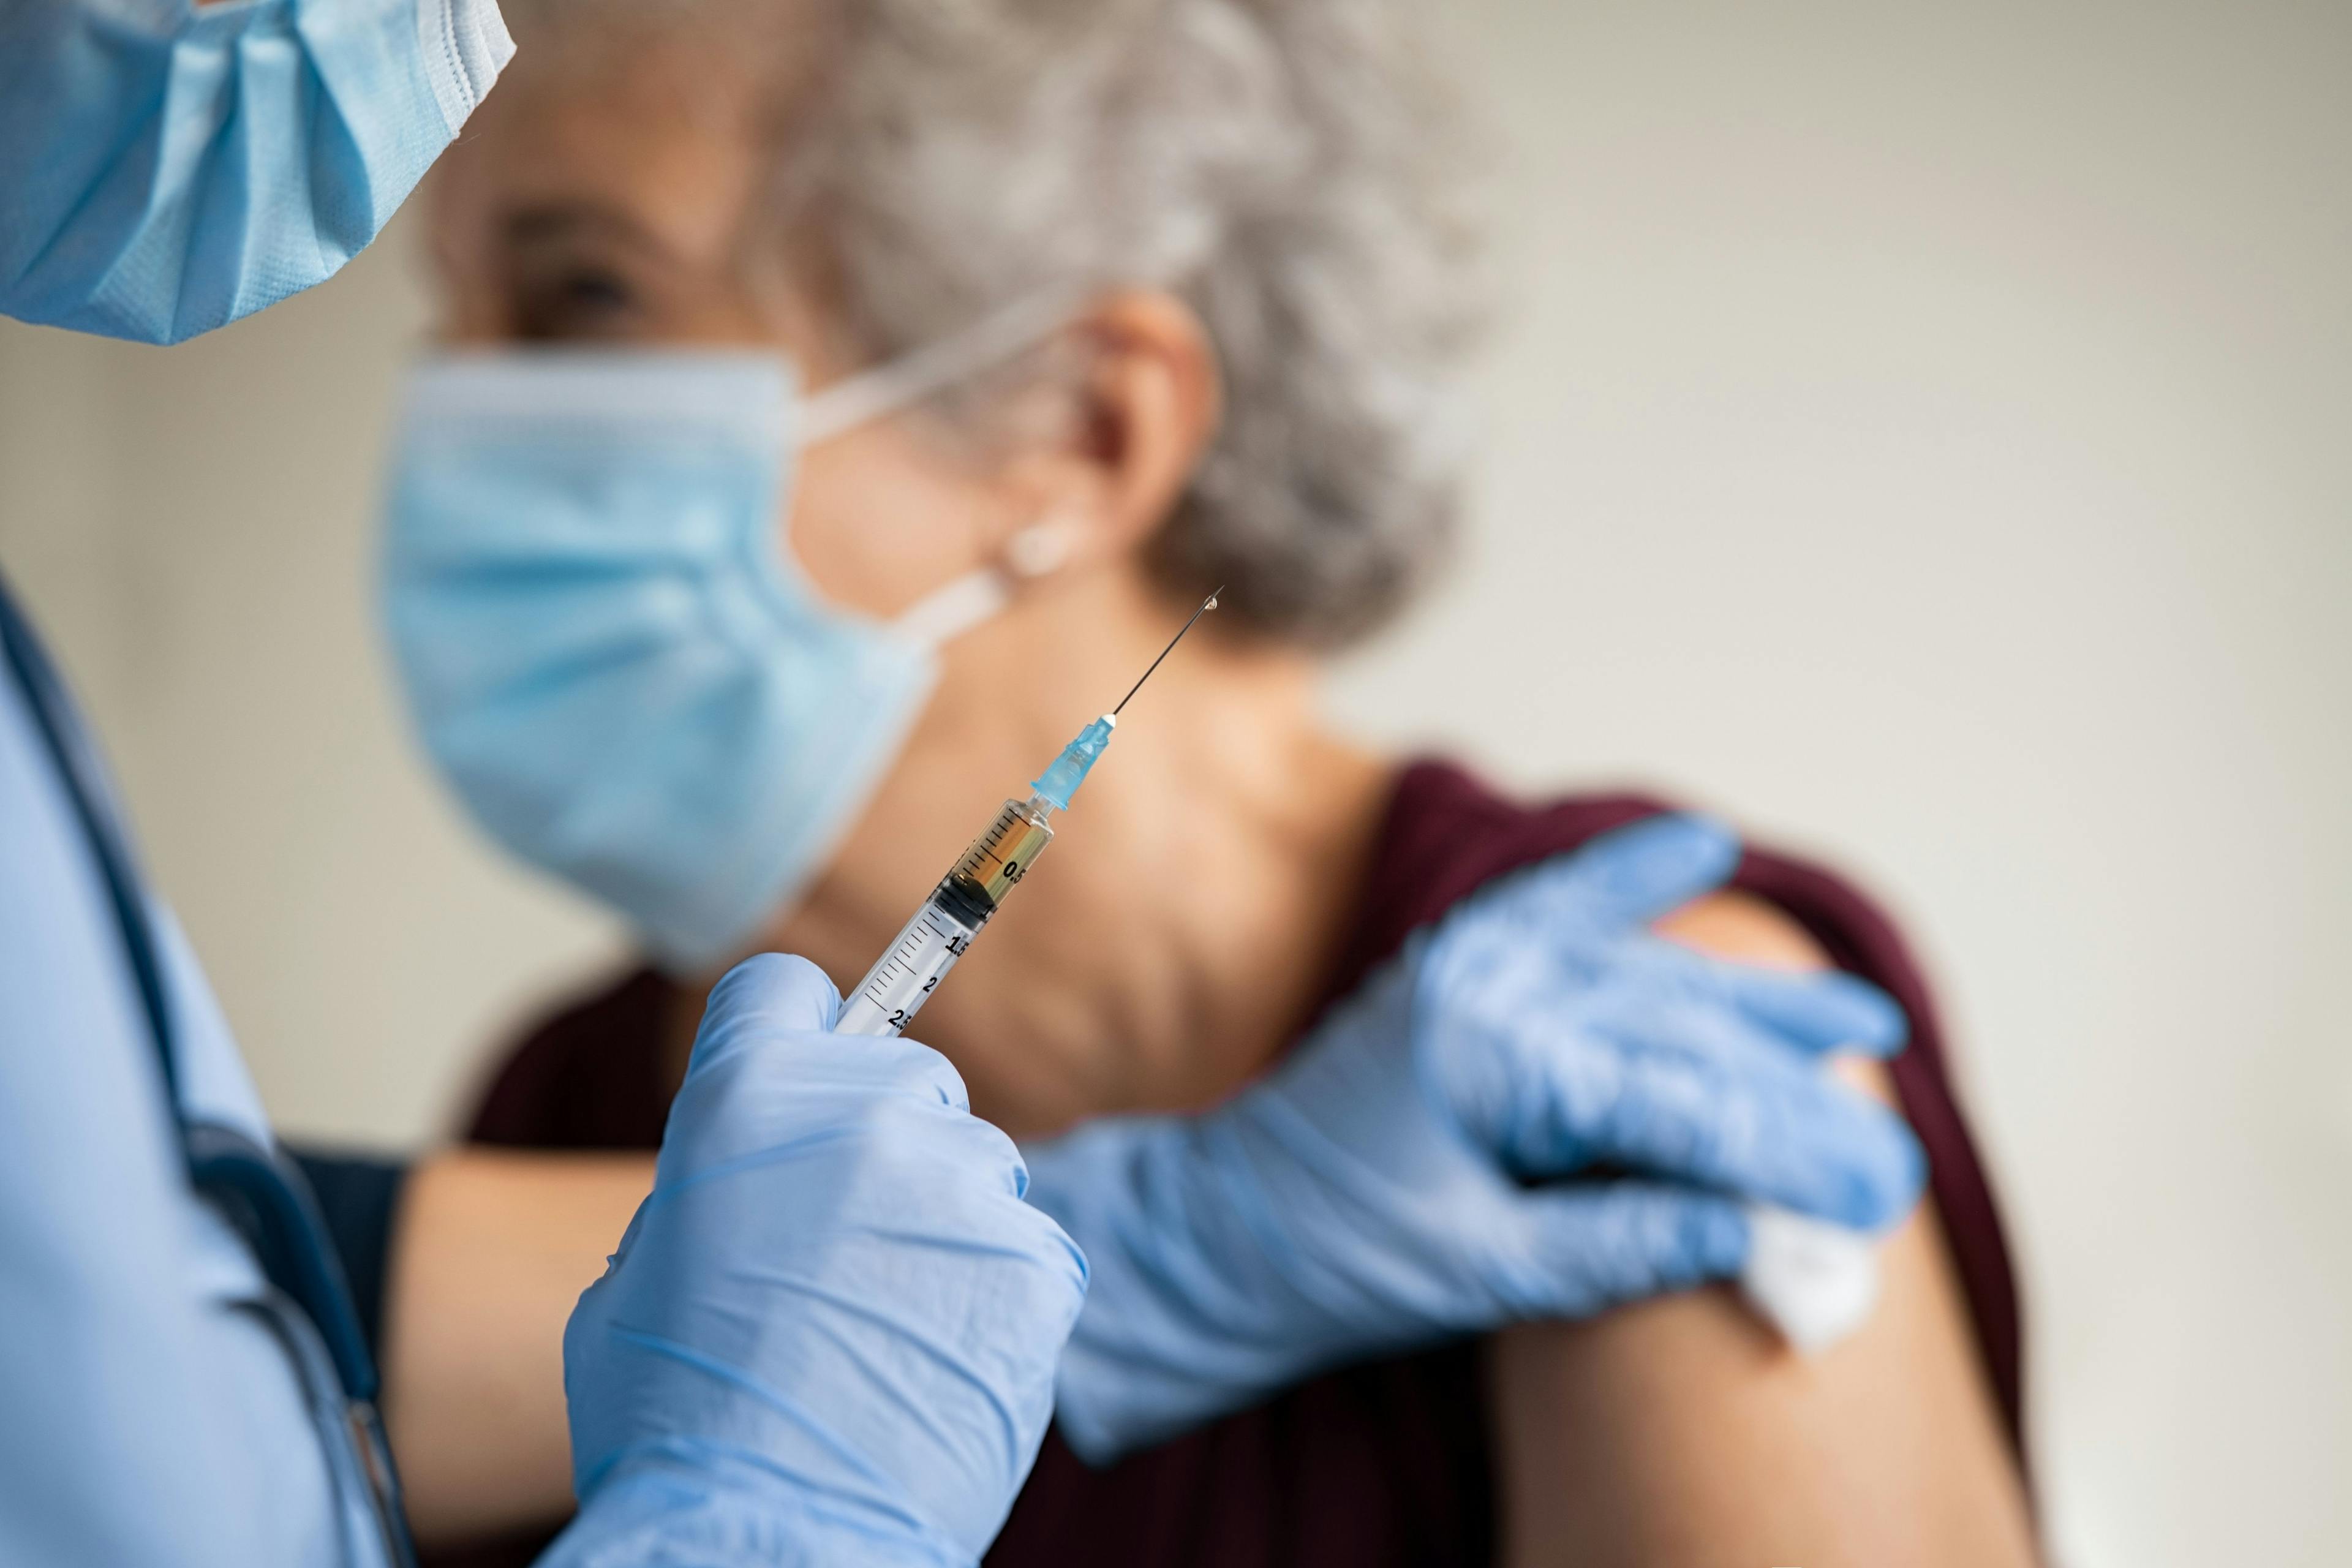 Cigna Requiring COVID-19 Vaccinations or Testing for Employees Entering U.S. Worksites